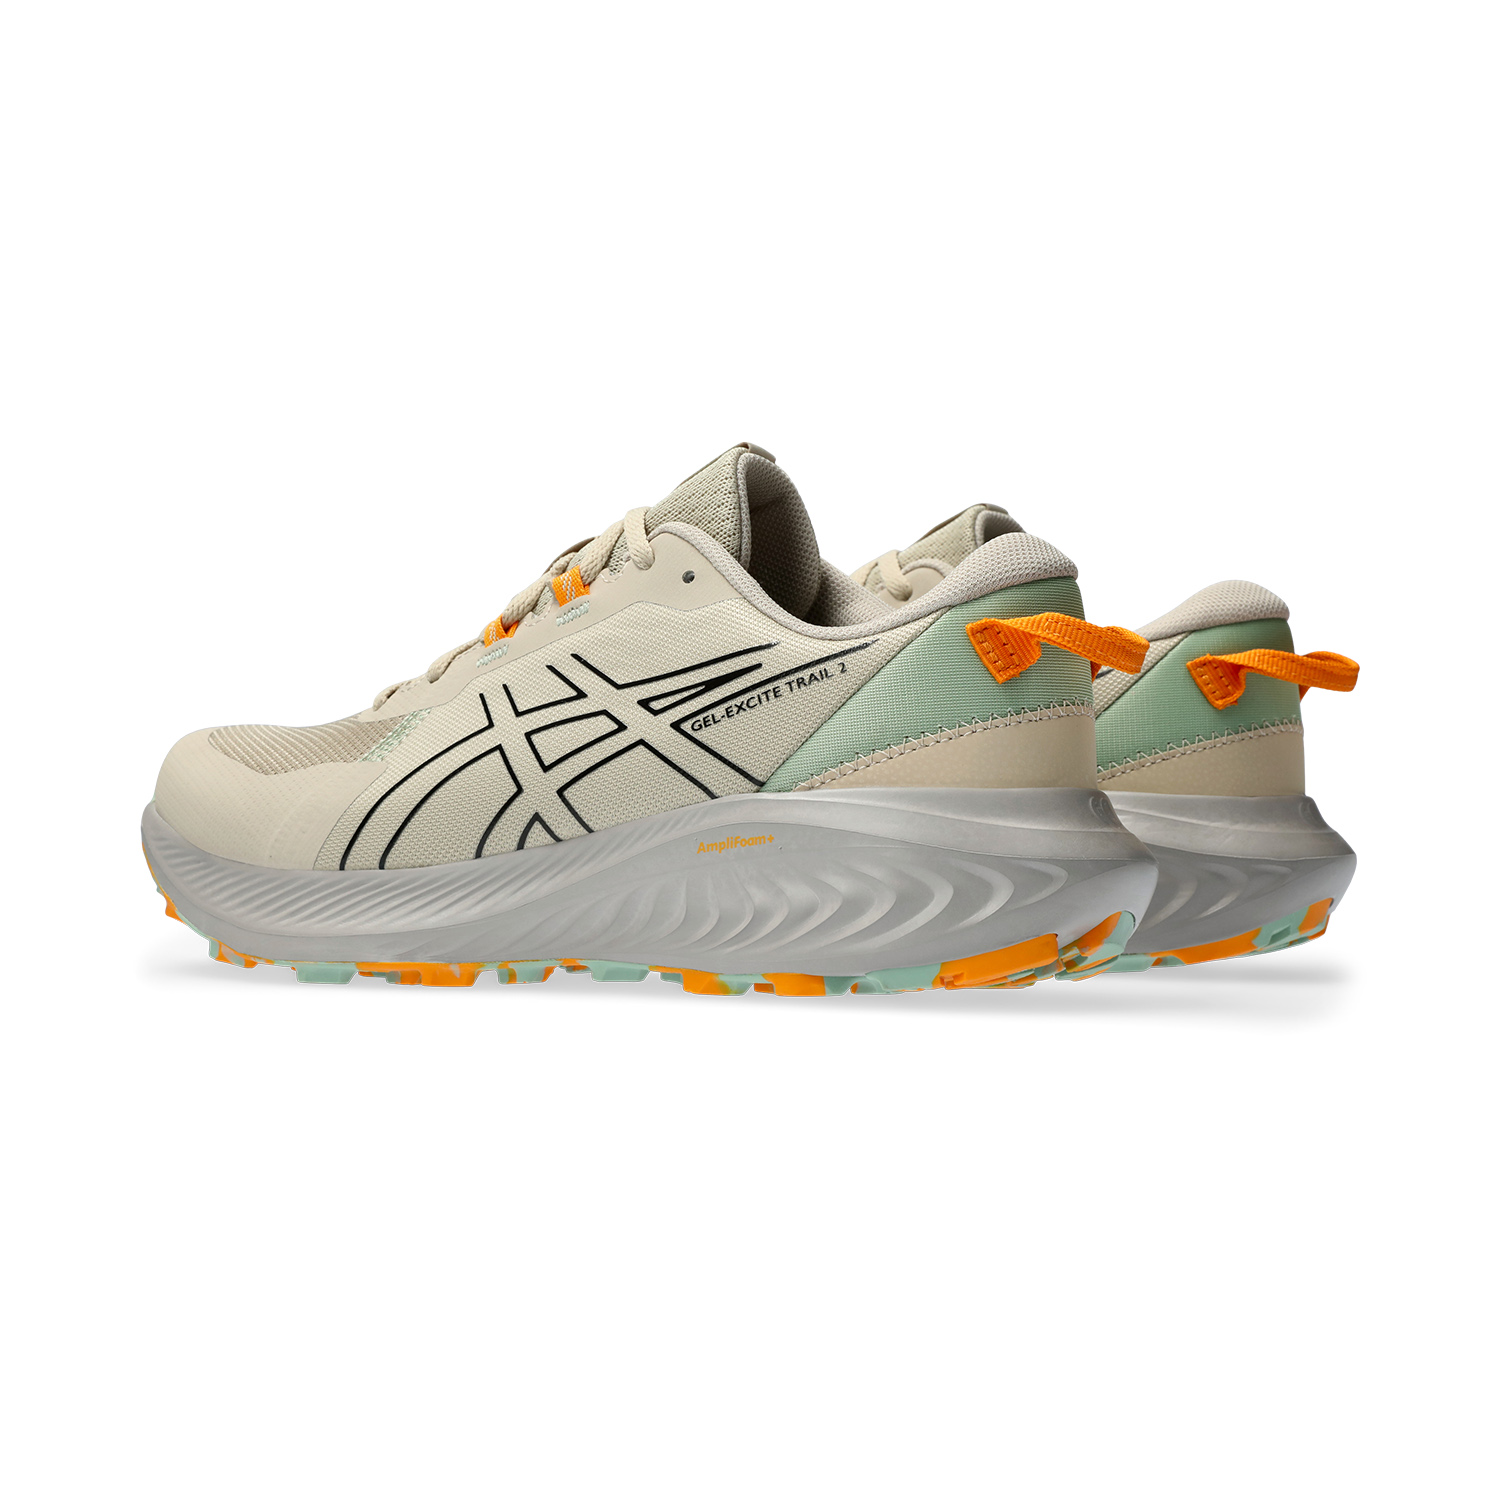 Asics Gel Excite Trail 2 - Feather Grey/Black